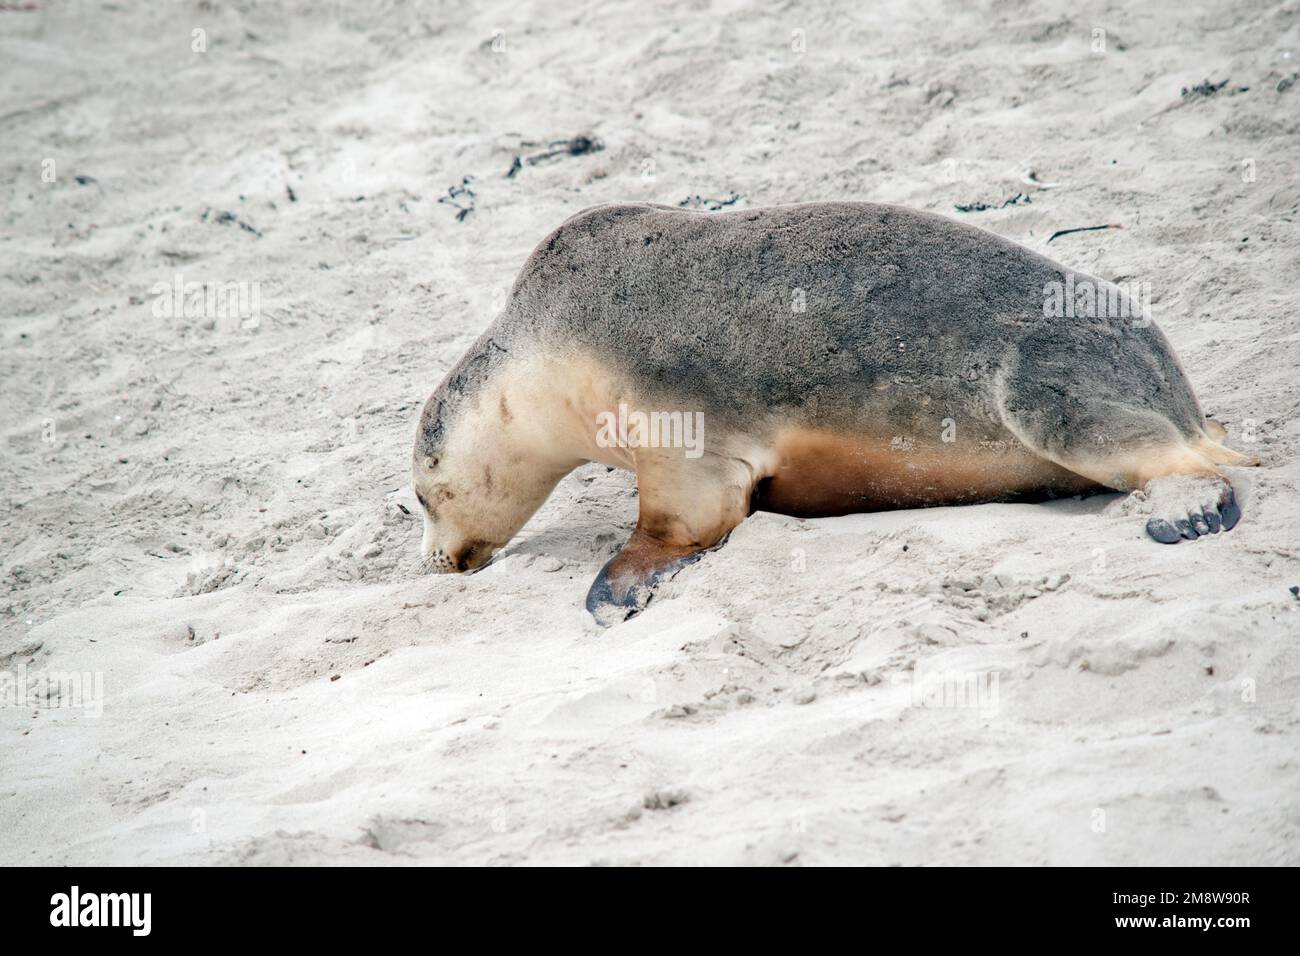 the sealion is white on the bottom and grey on top Stock Photo